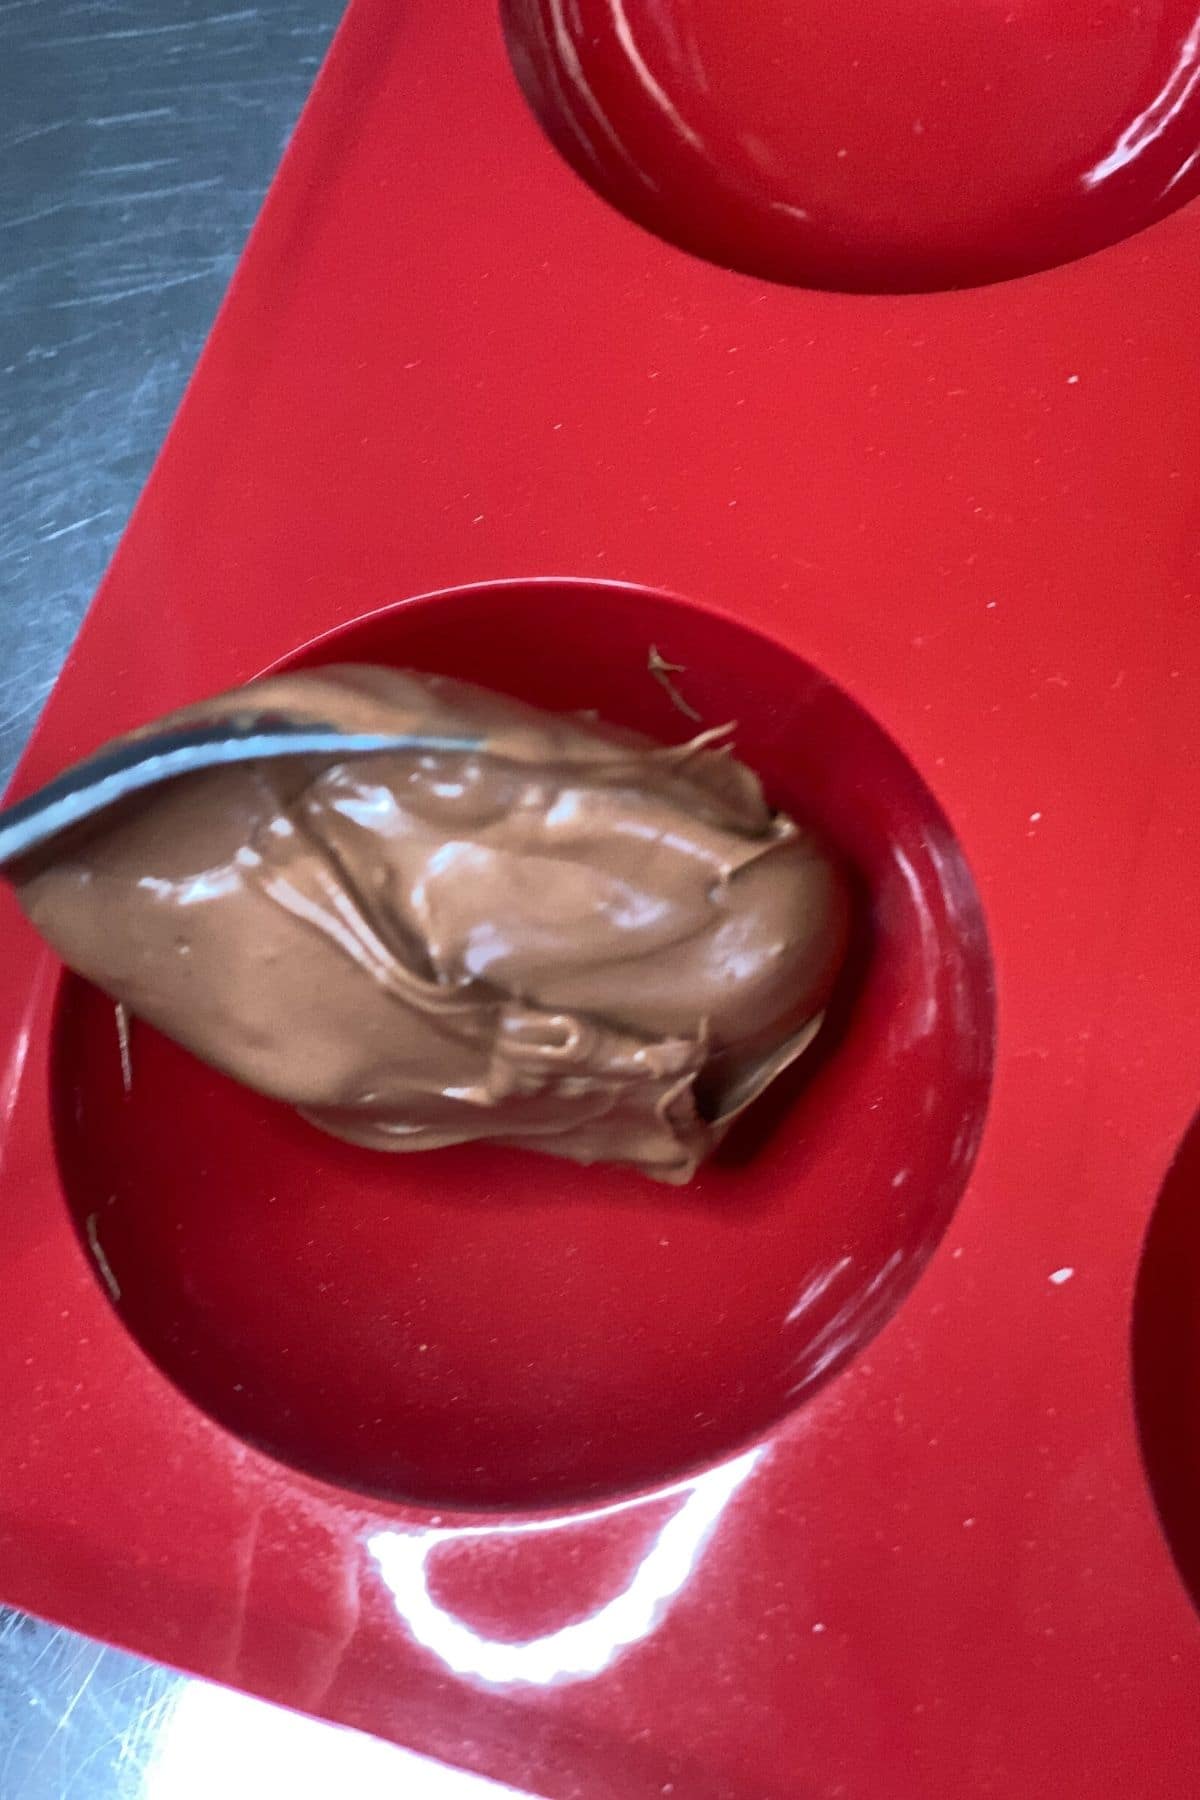 Spooning chocolate into a silicone mold